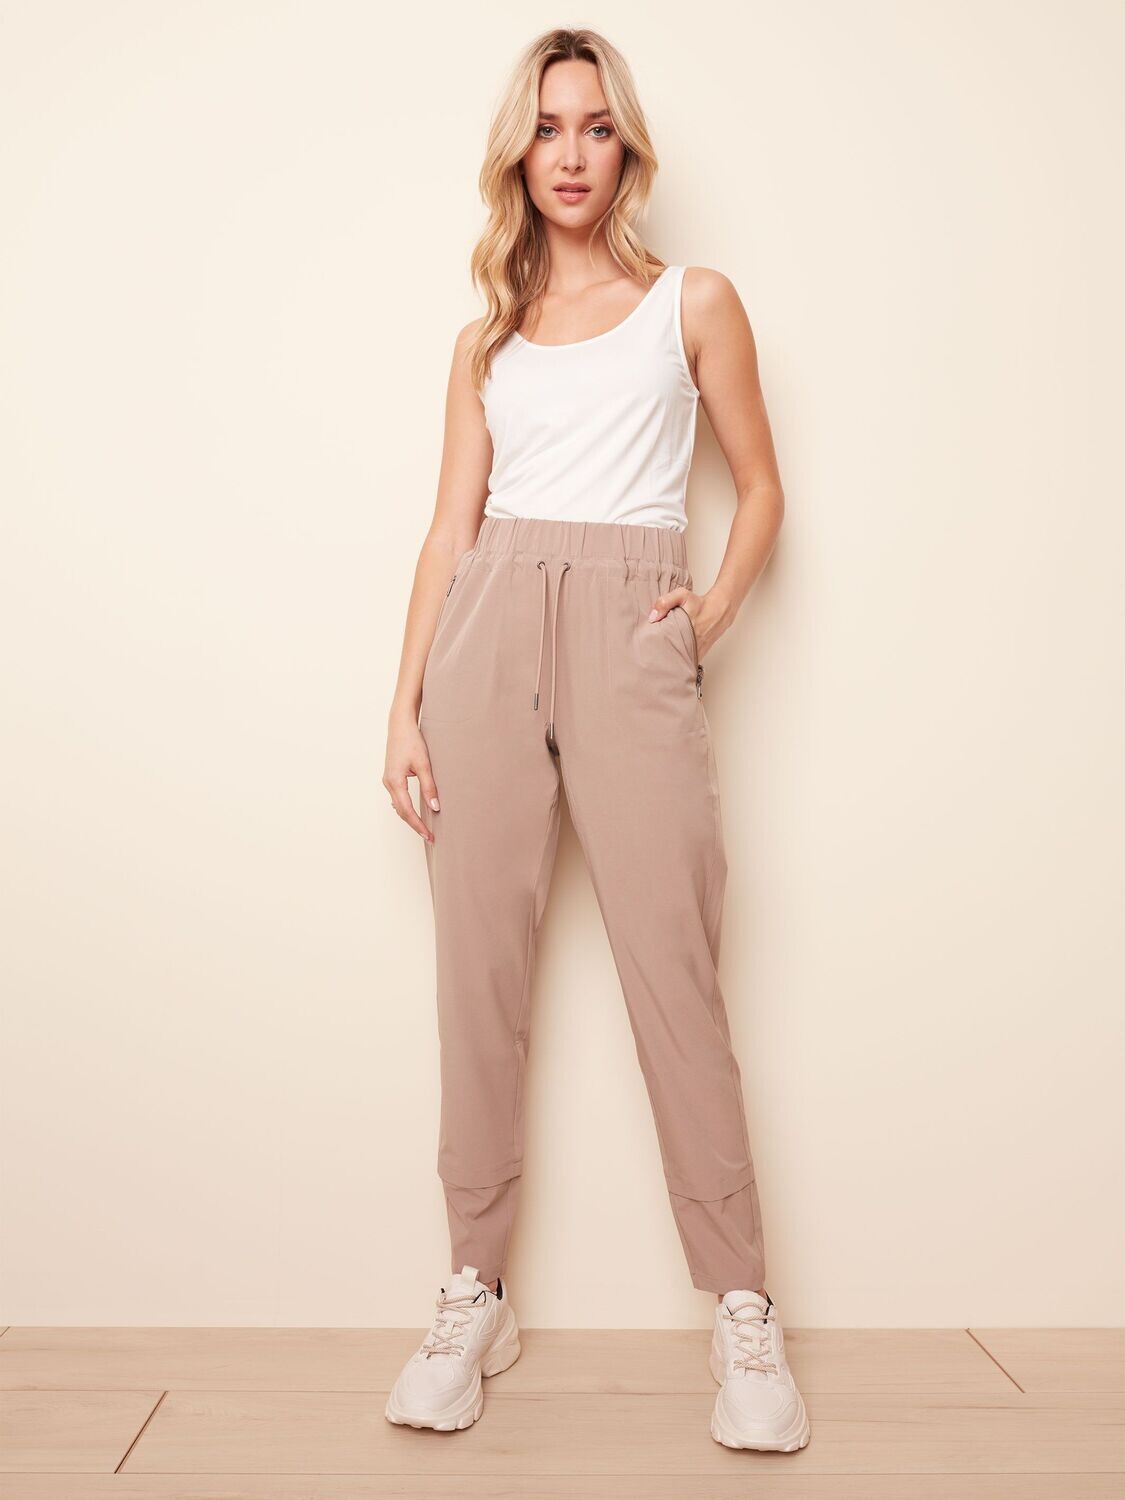 Charlie B Pull On Pant With Cuff Honey